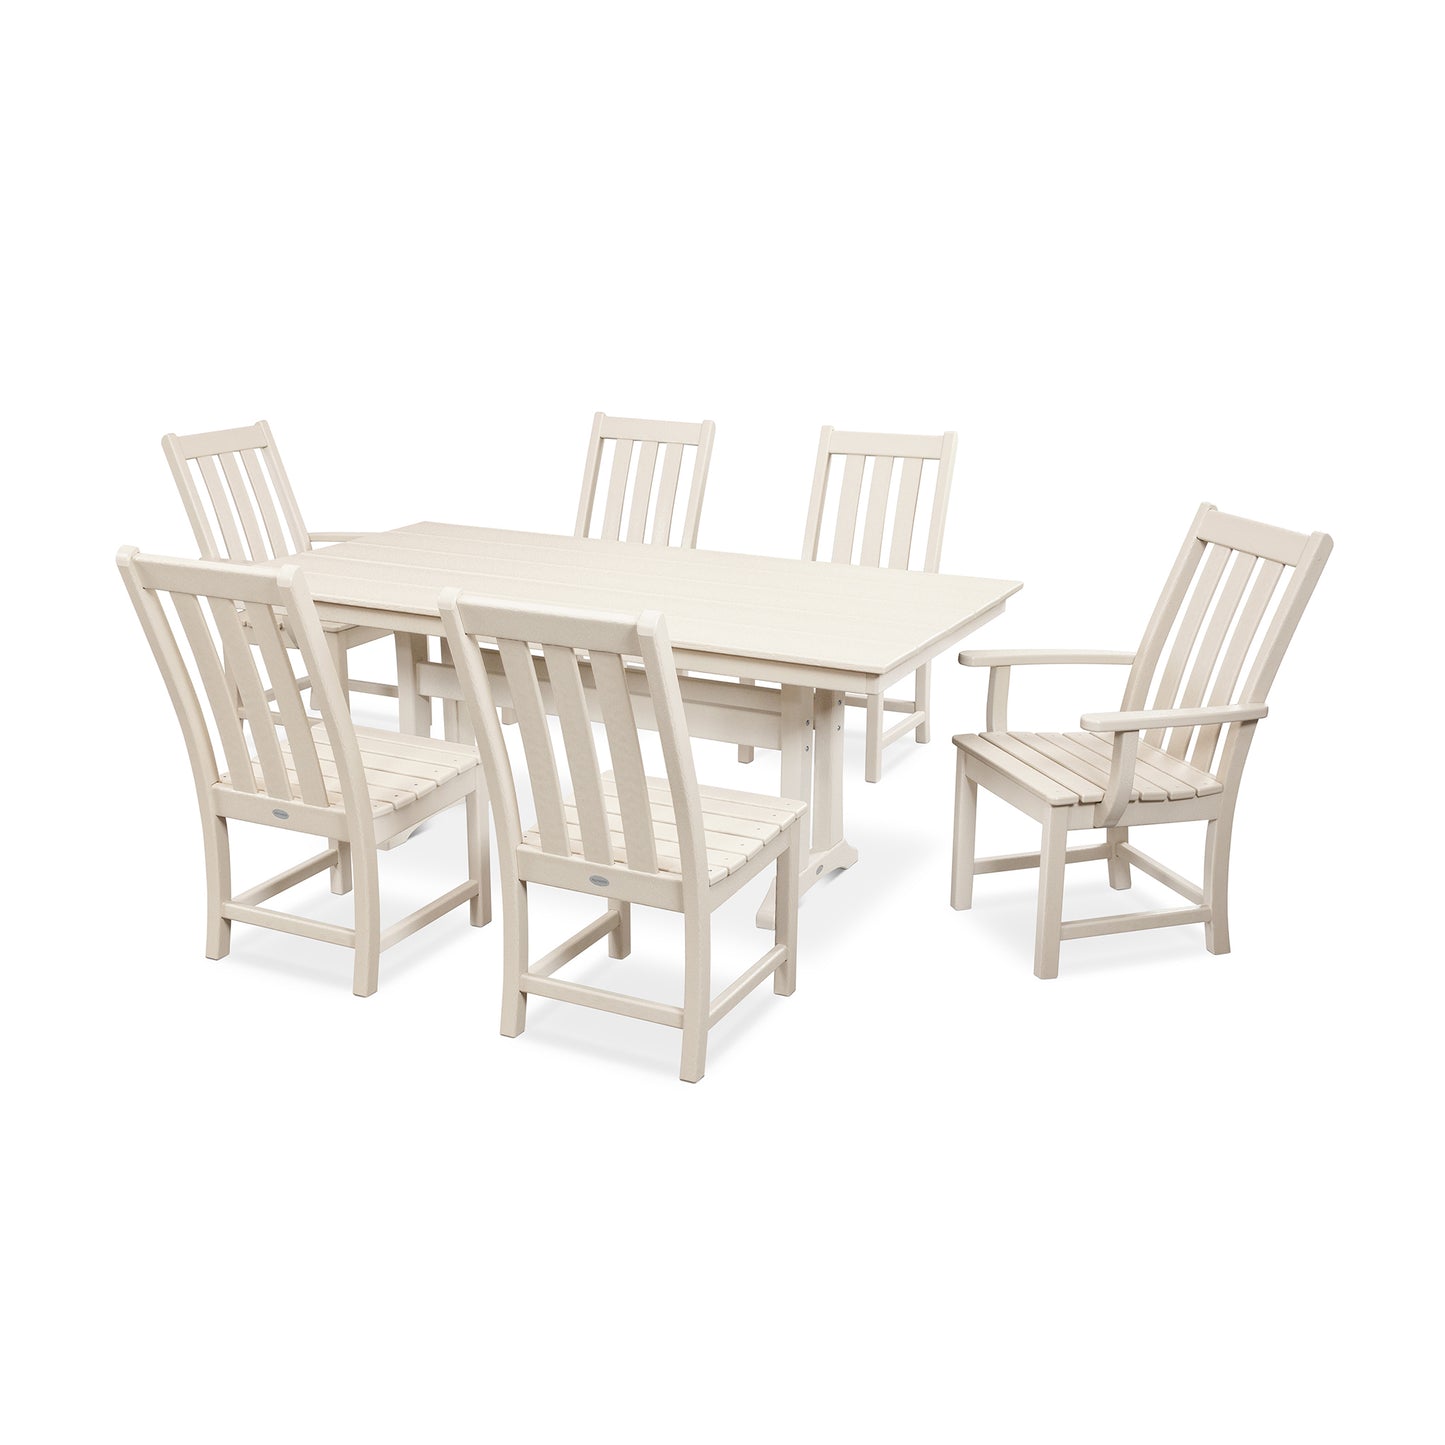 A modern POLYWOOD Vineyard 7-Piece Farmhouse Trestle Dining Set consisting of a rectangular table and six chairs, all in a matching pale beige color, isolated on a white background.